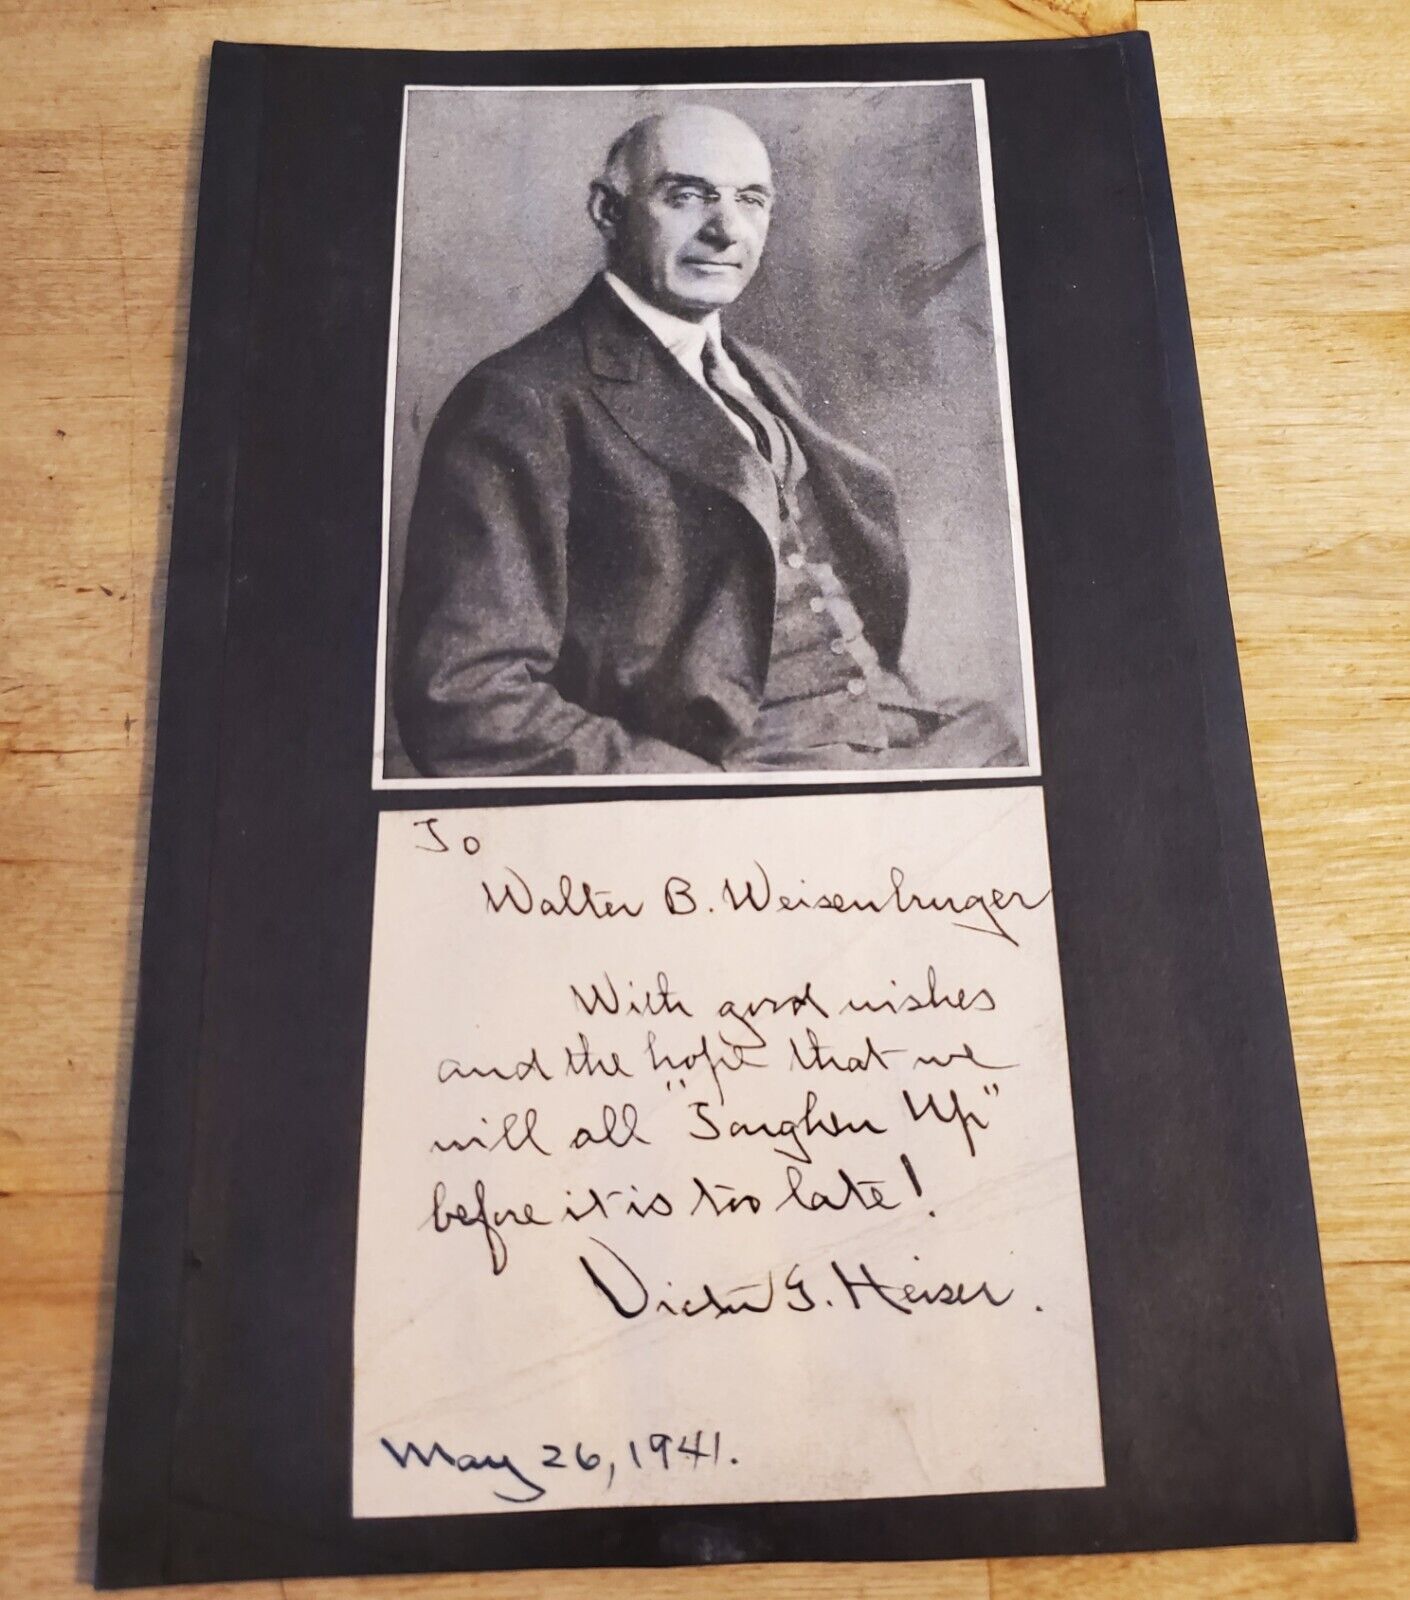 SIGNED IMAGE OF DR. VICTOR GEORGE HEISER: MAY 26, 1941: G-